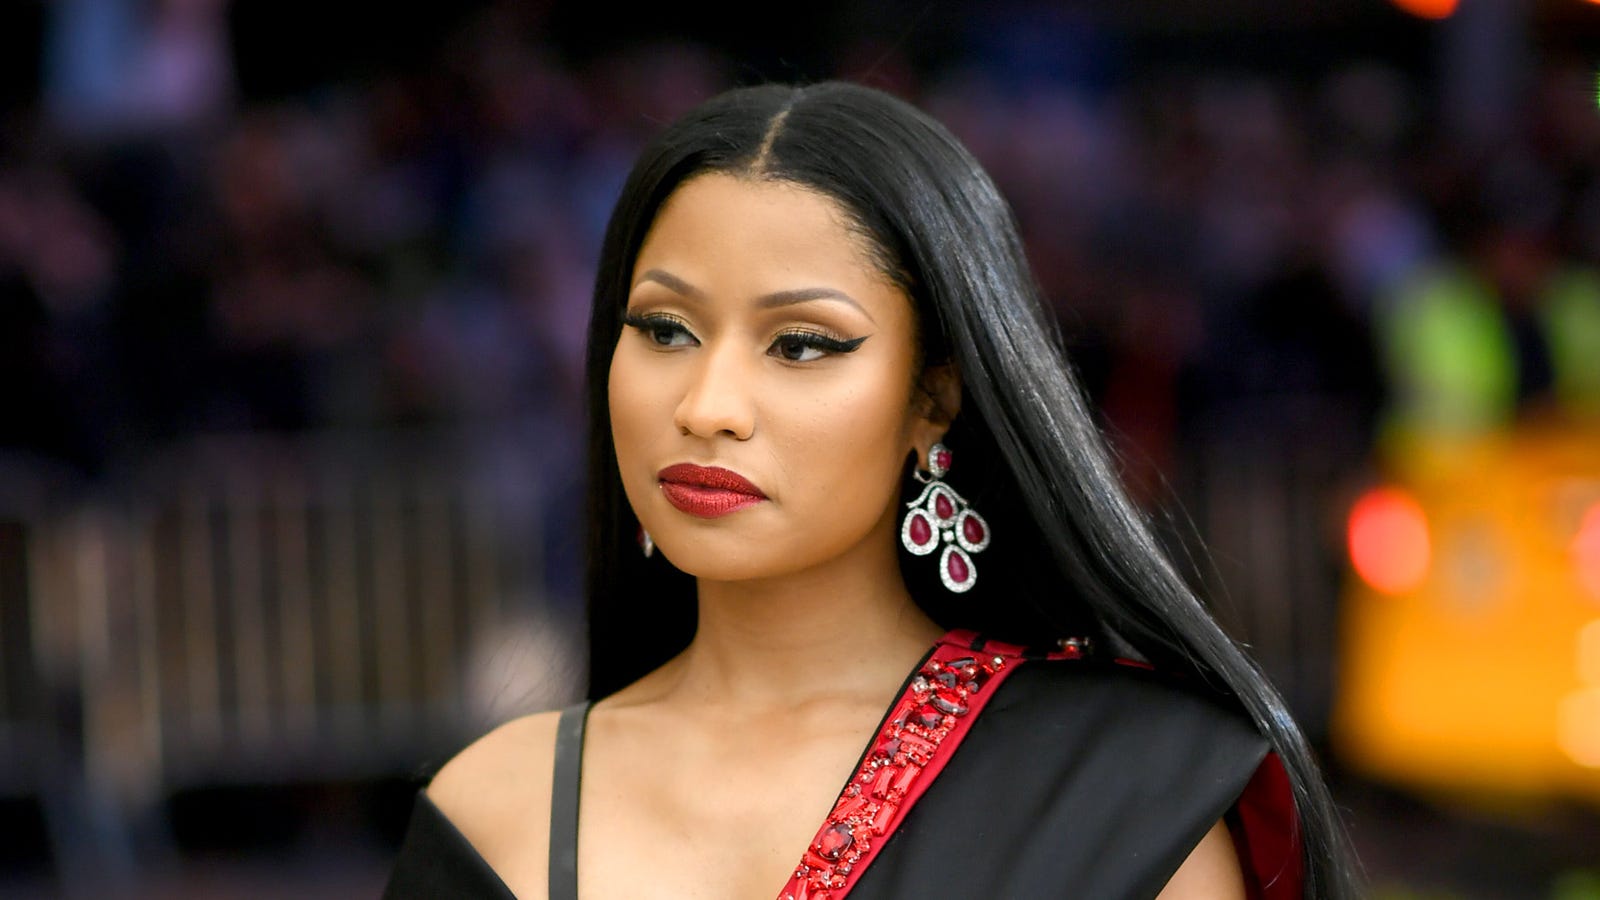 Nicki Minaj Is Back to Remind You She's Not the Bad Guy